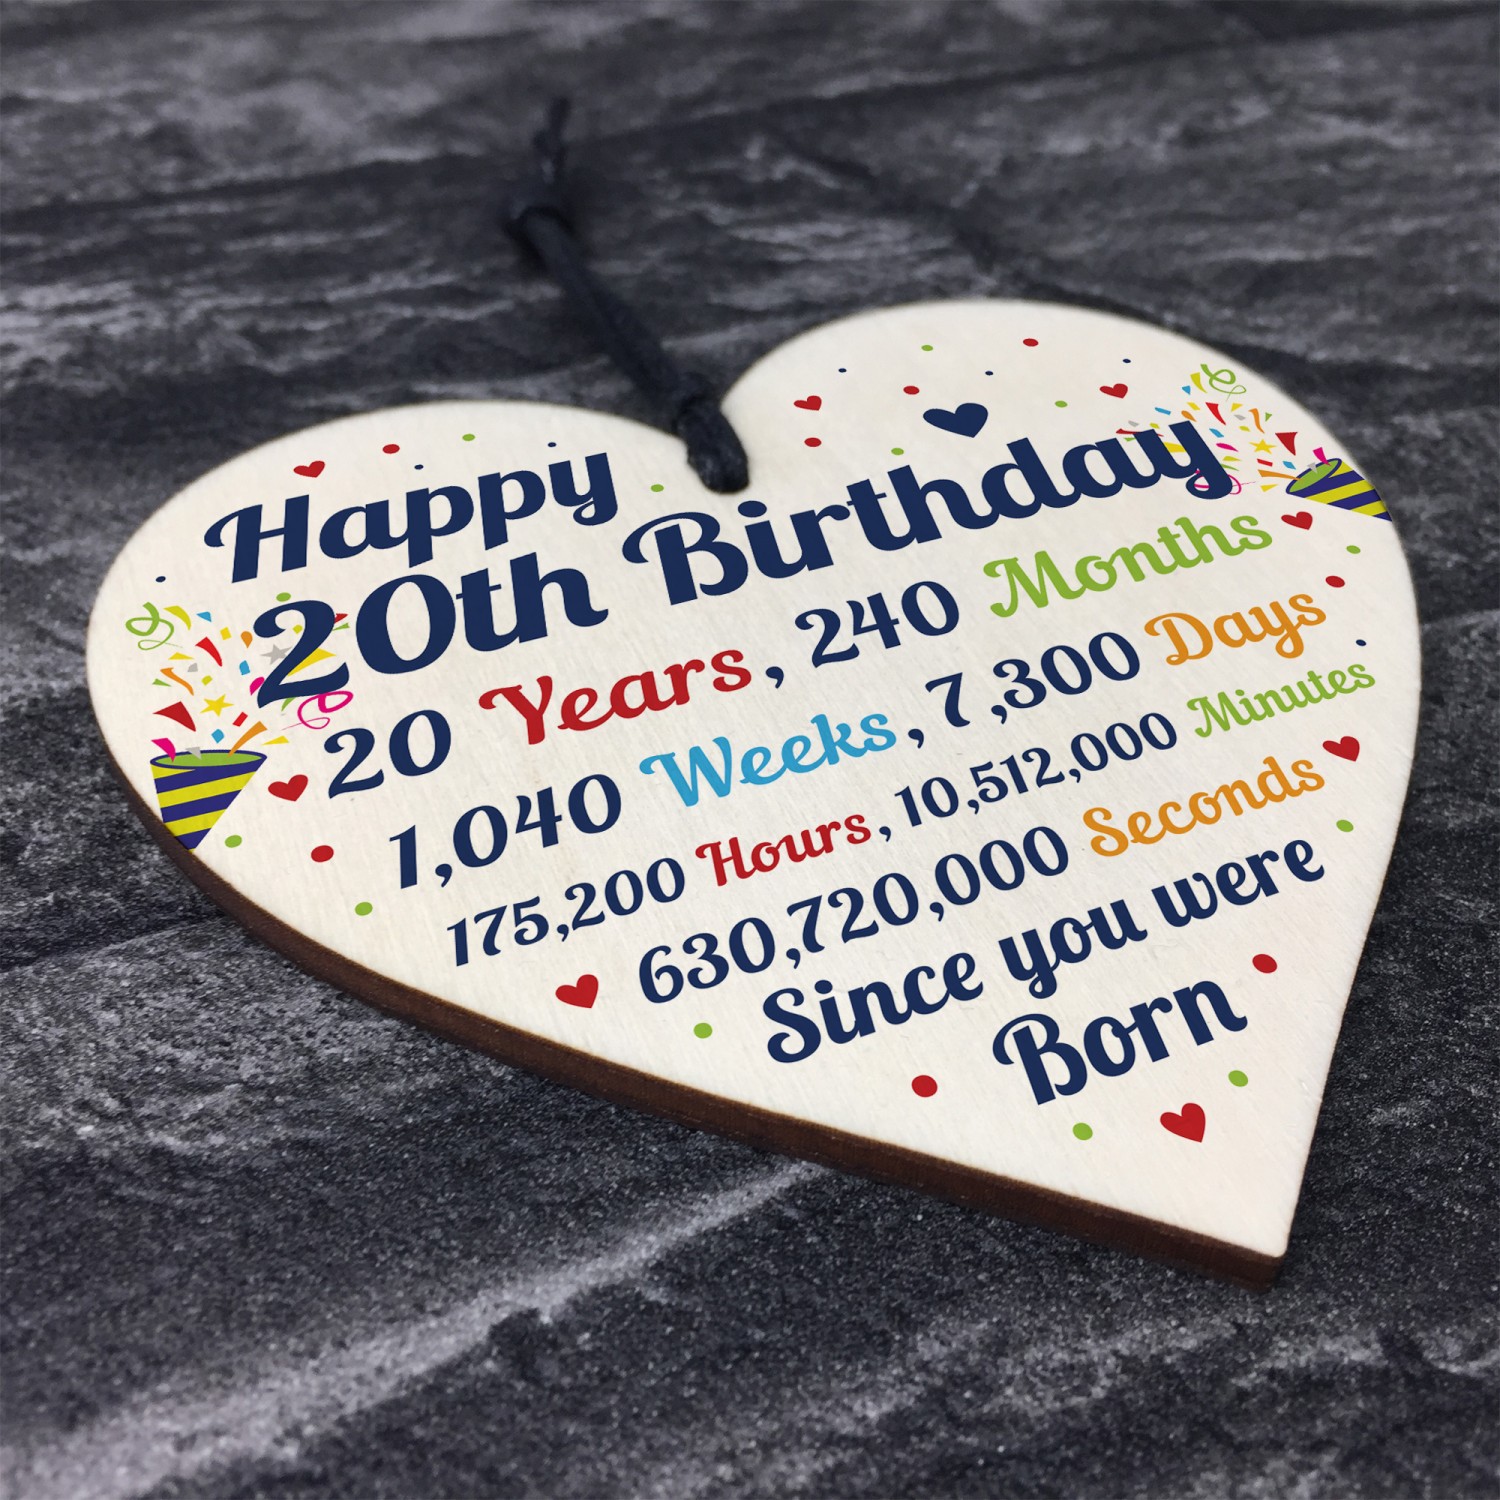 happy-20th-birthday-wishes-quotes-and-messages